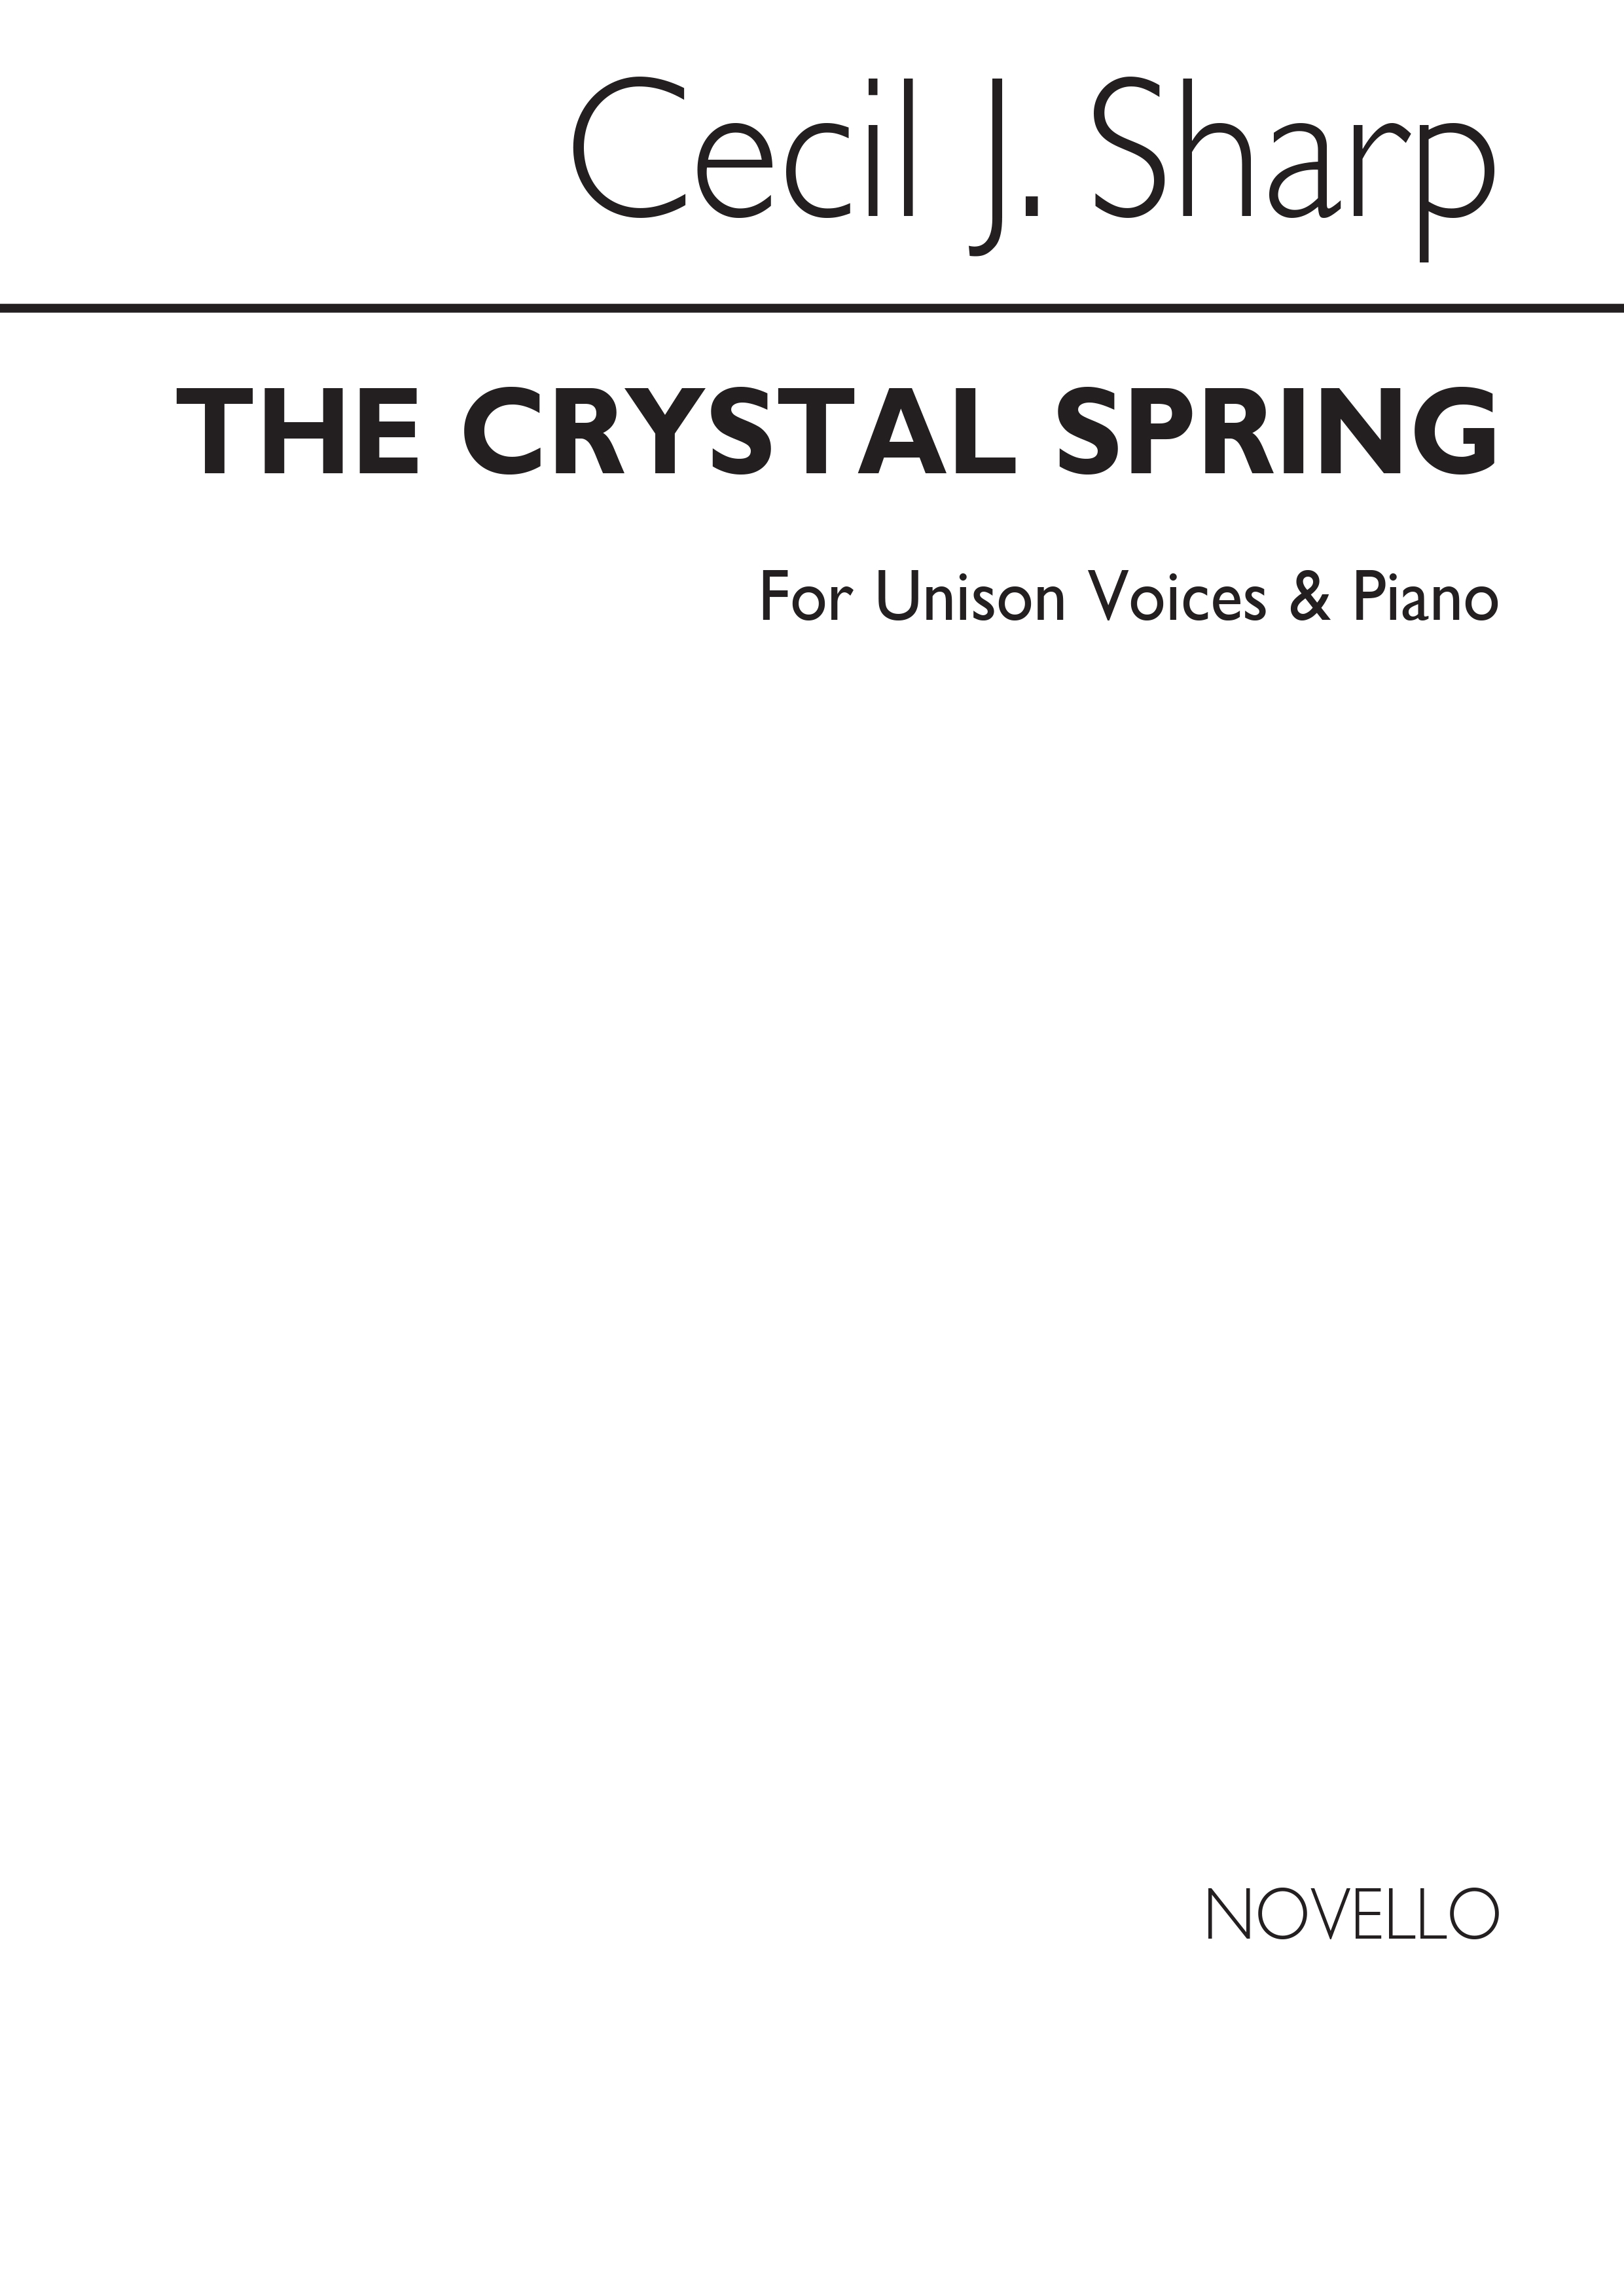 Cecil Sharp: The Crystal Spring